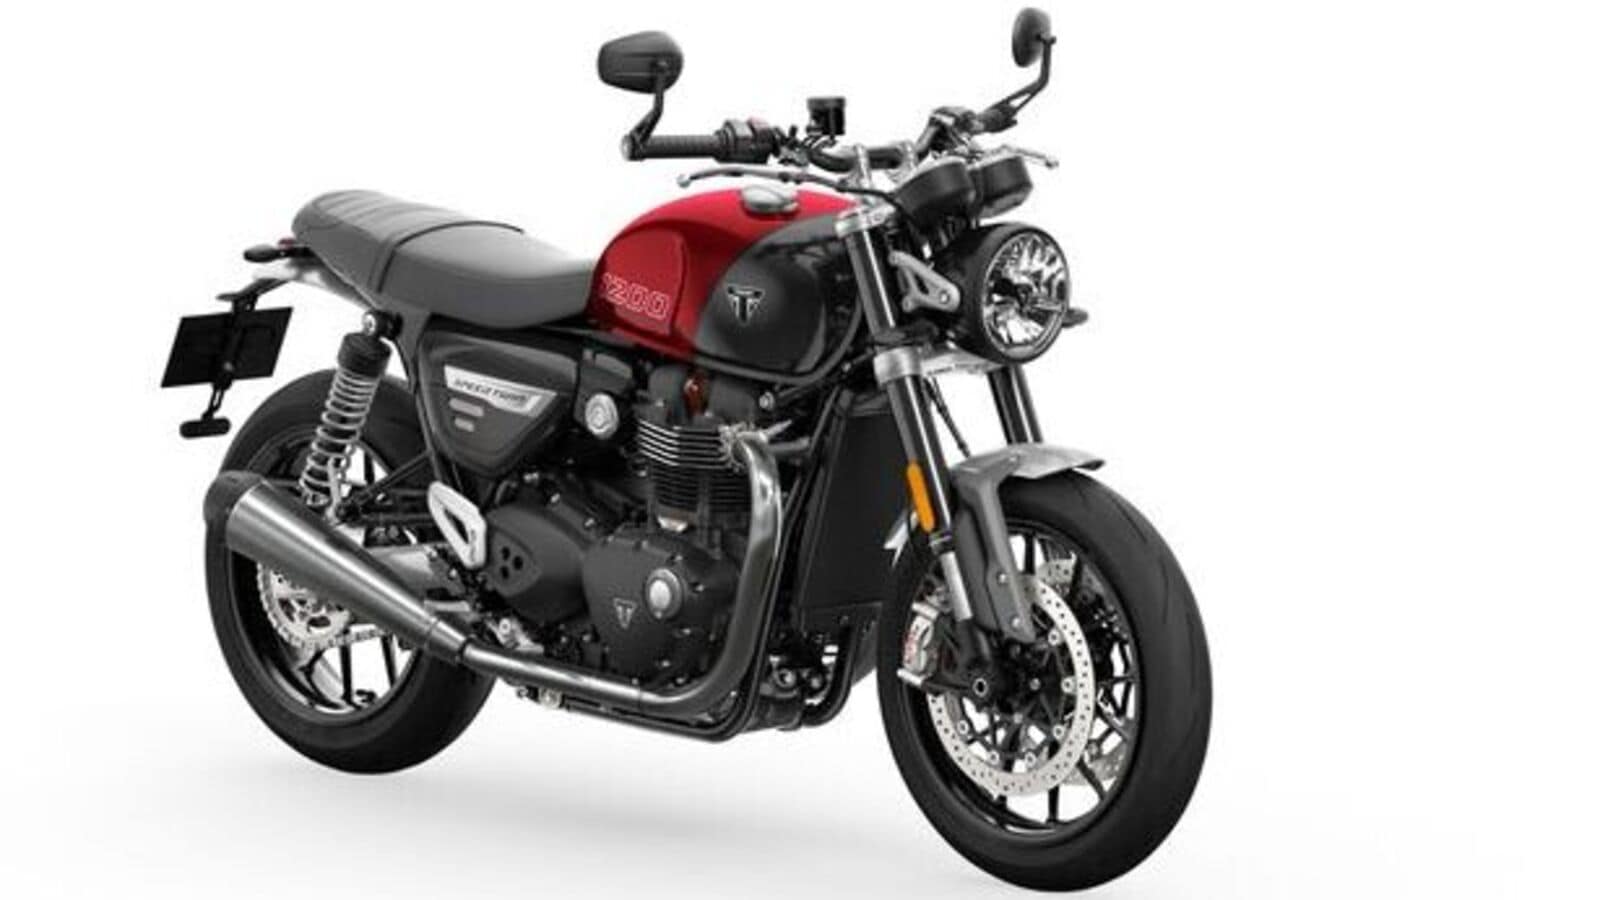 World premiere of Triumph Speed Twin 900 and Speed Twin 1200 for India ...